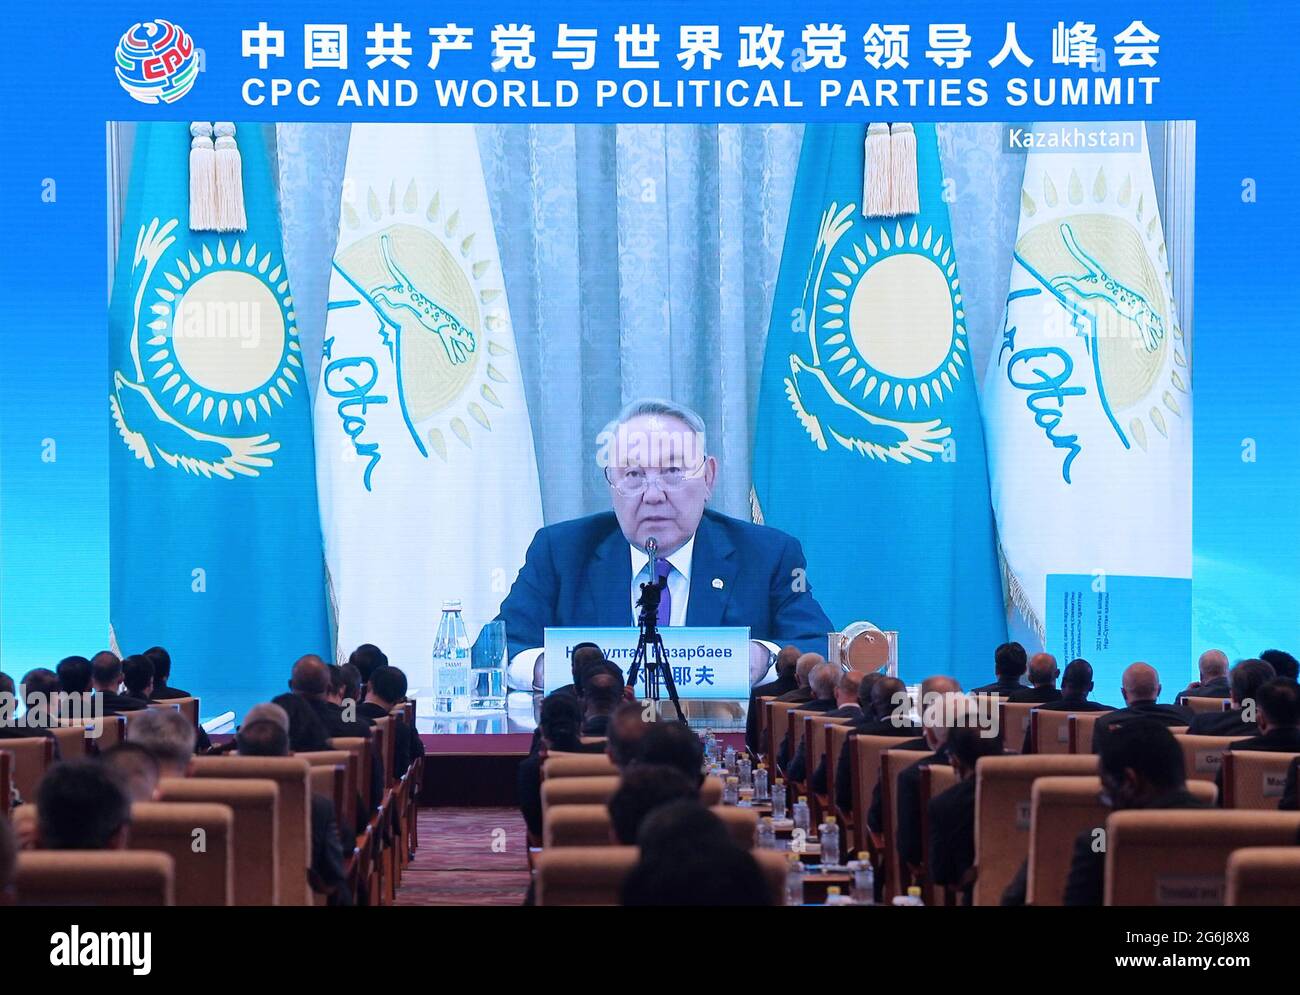 Beijing, Nur Otan Party and Kazakhstan's first president. 6th July, 2021. Nursultan Nazarbayev, chairman of the Nur Otan Party and Kazakhstan's first president, addresses the Communist Party of China (CPC) and World Political Parties Summit on July 6, 2021. The CPC and World Political Parties Summit was held via video link on Tuesday. Credit: Cai Yang/Xinhua/Alamy Live News Stock Photo